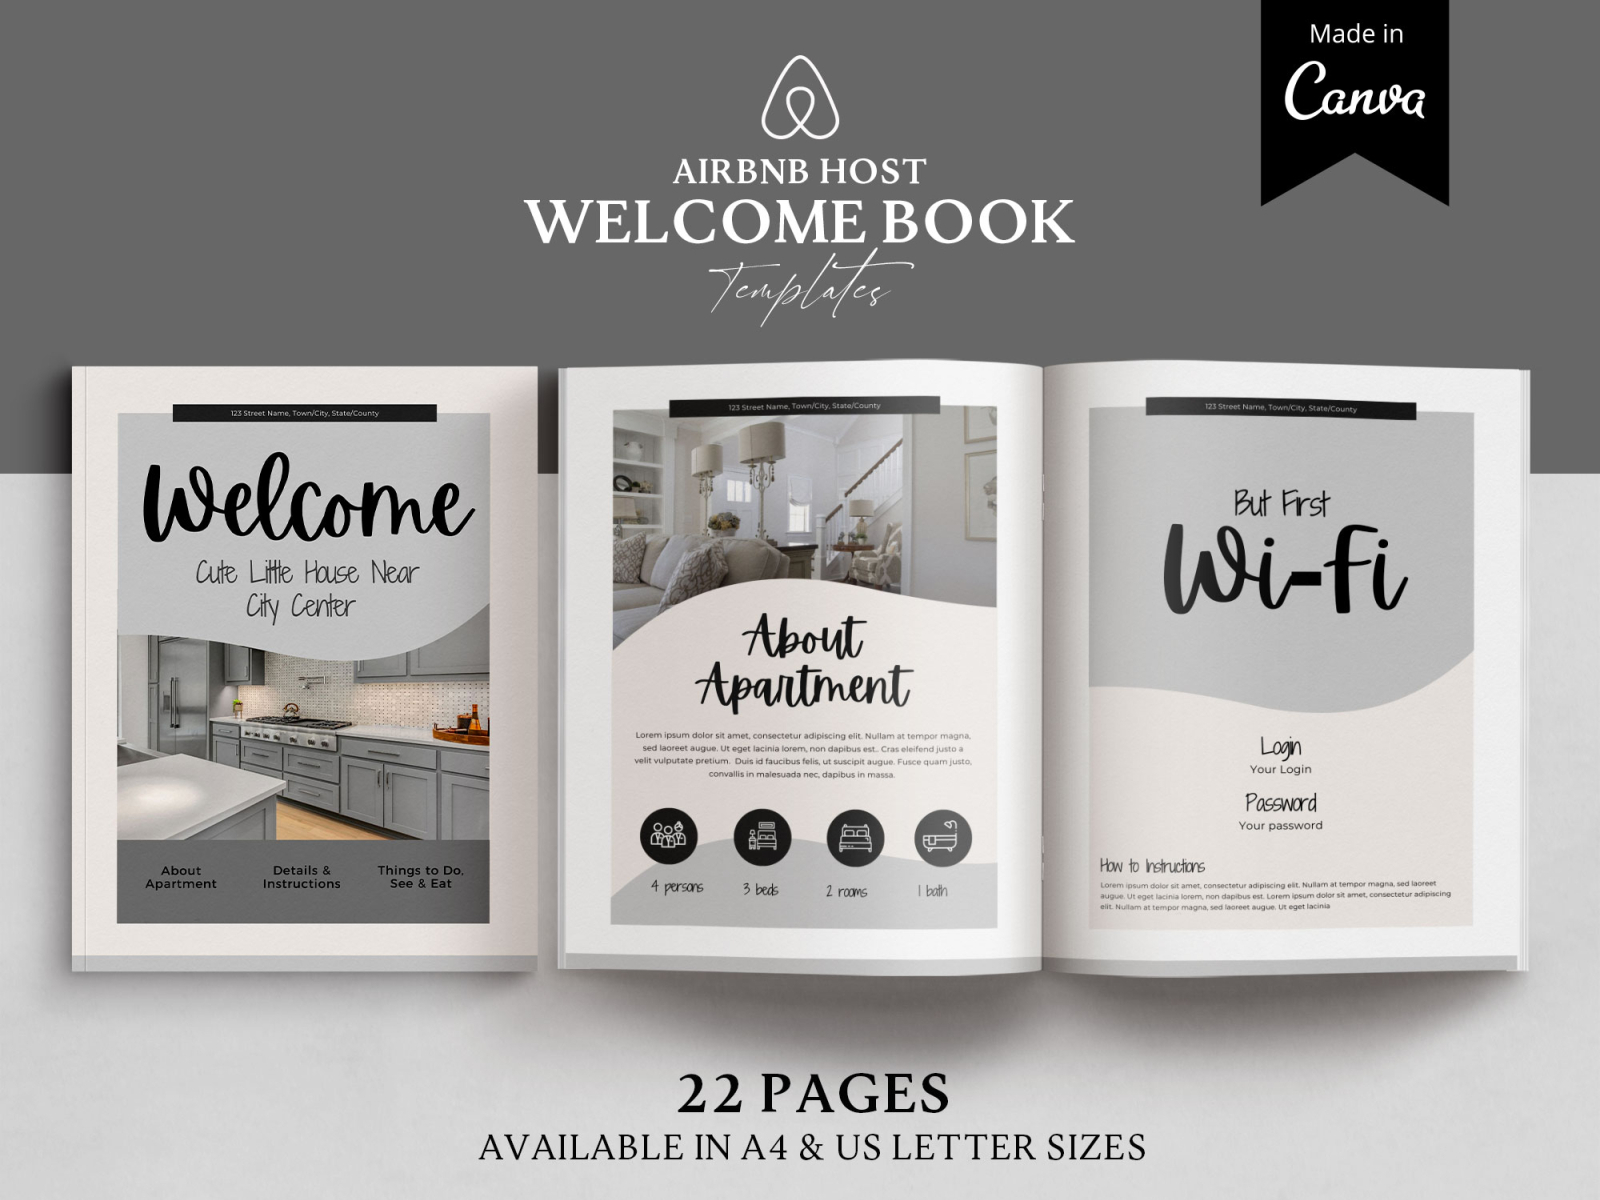 Airbnb Guest Book Template Canva by Ilya Dubynin on Dribbble